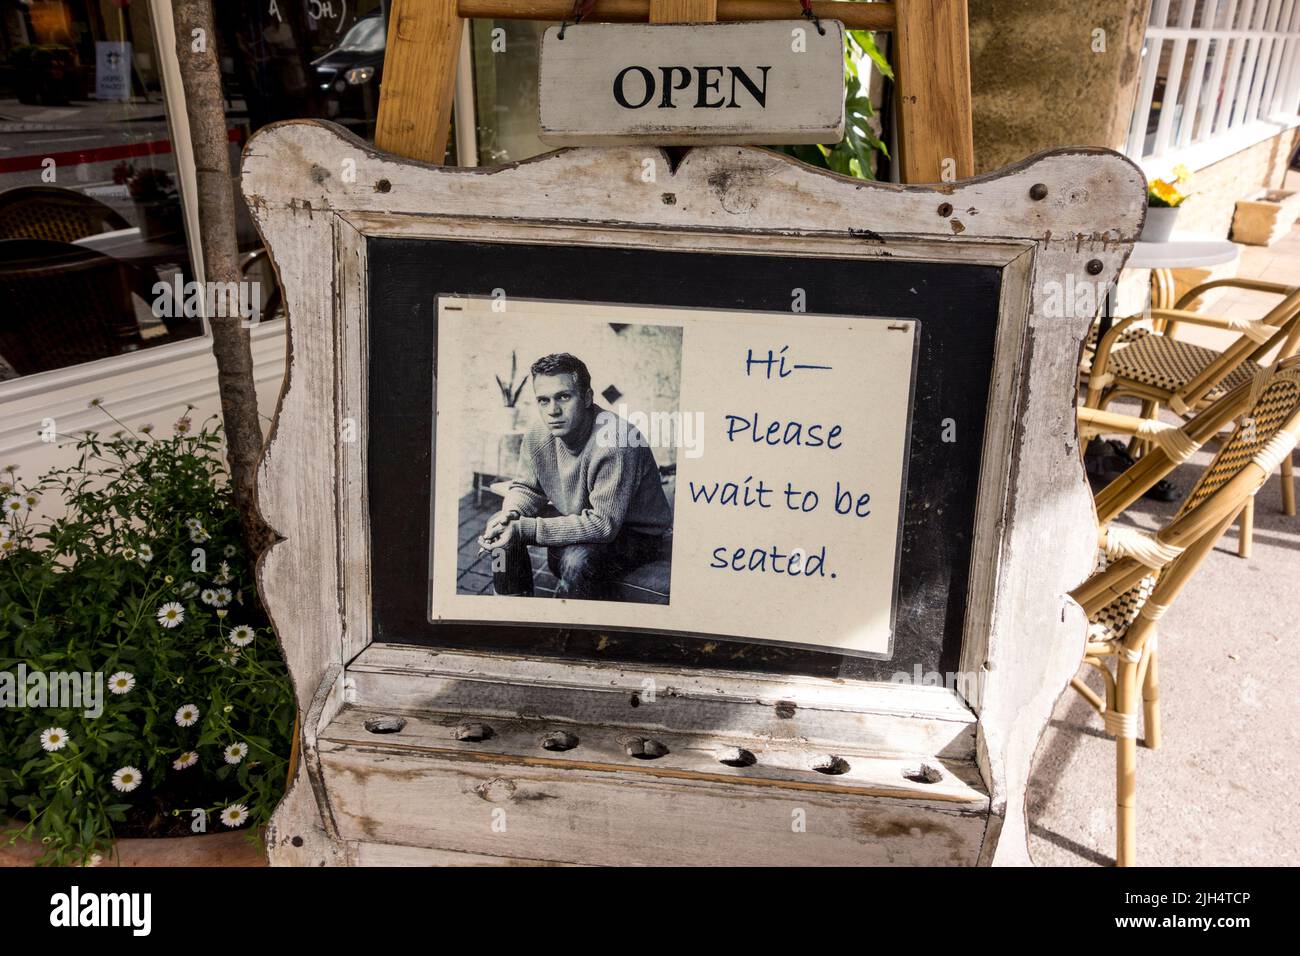 Sign asking customers to wait to be seated at the entrance of cafe, Tetbury, Gloucestershire, UK Stock Photo